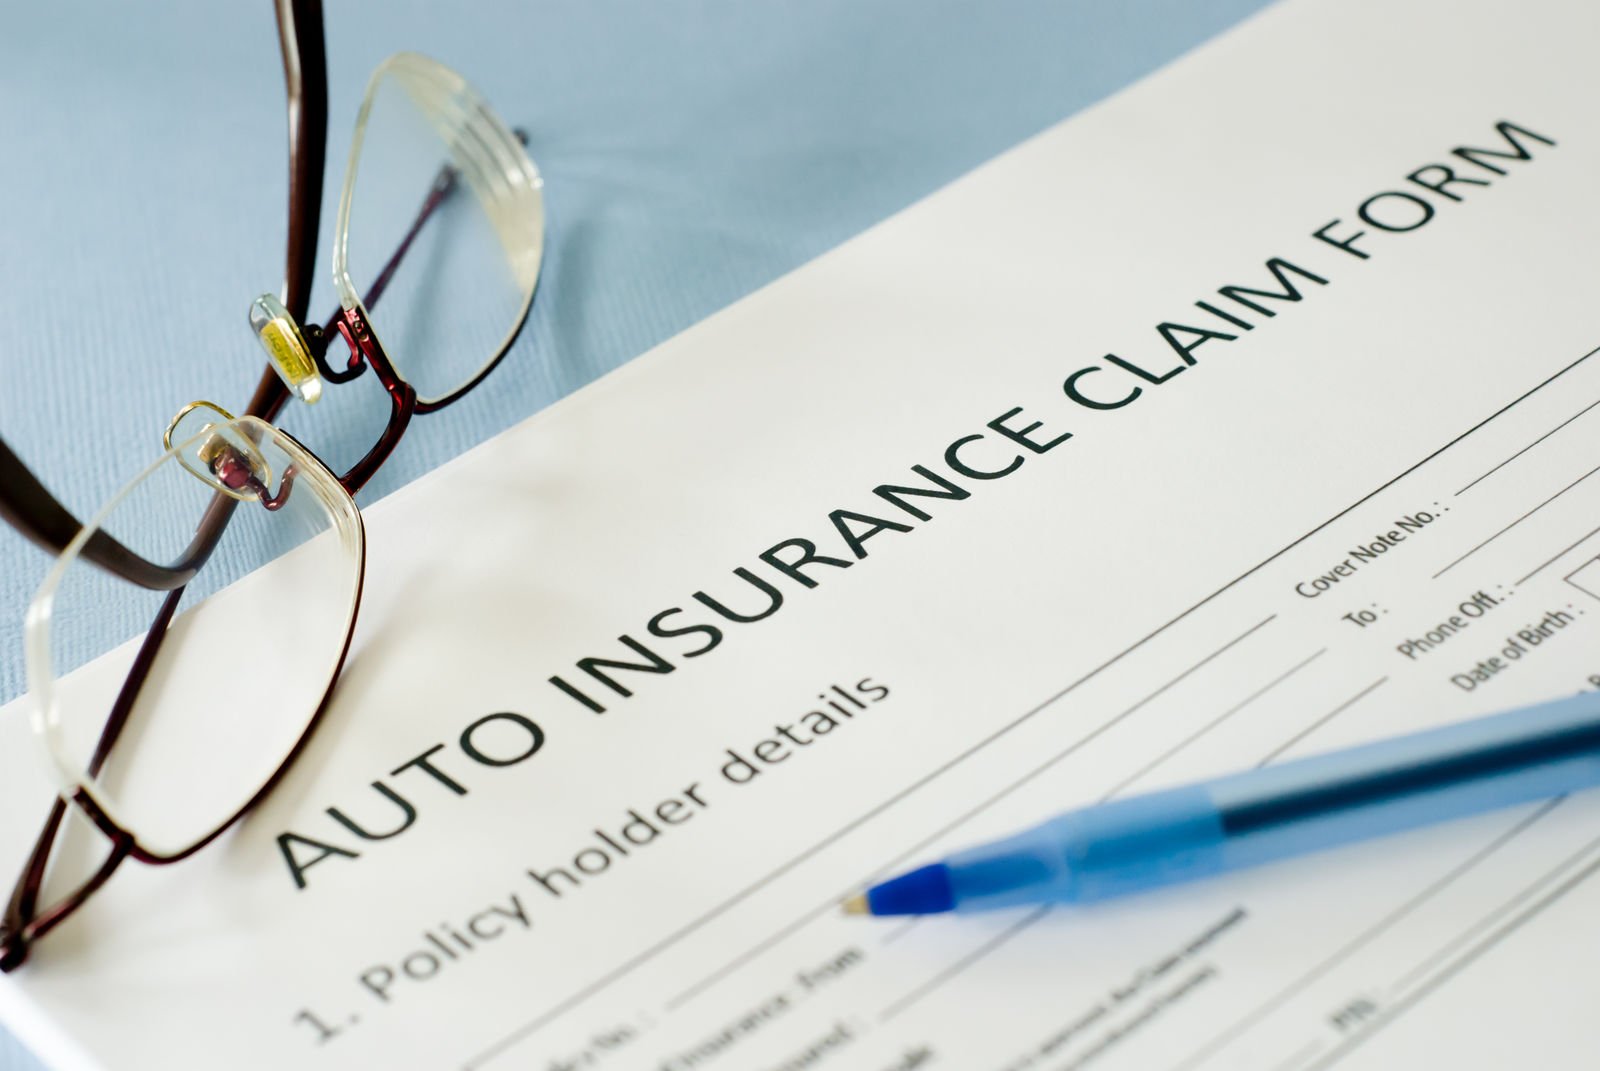 How long can an auto insurance claim stay open?